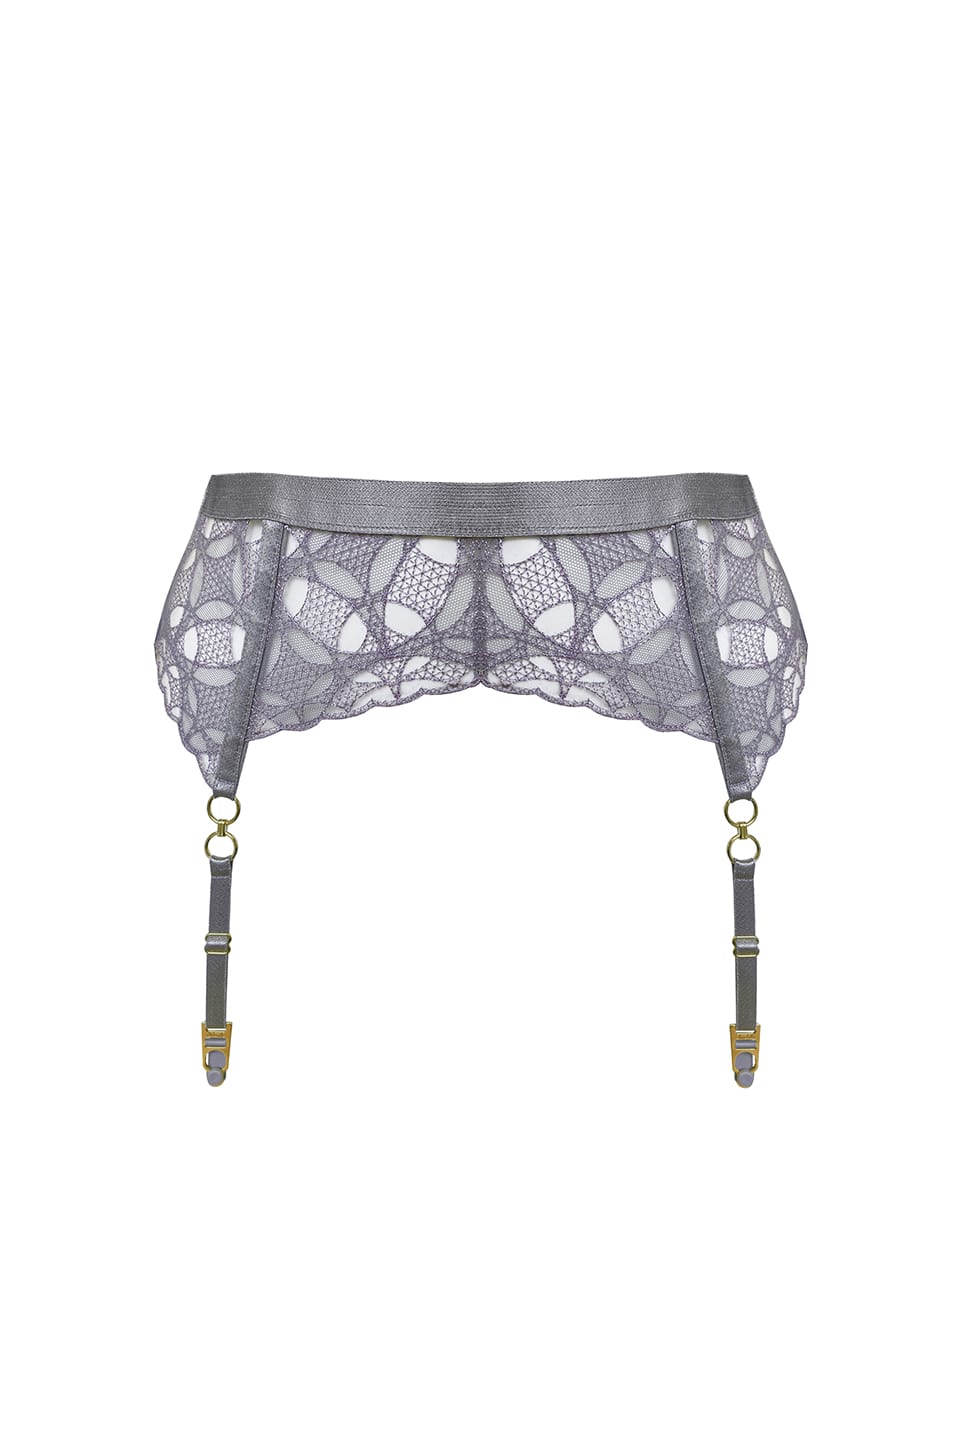 Shop online trendy Grey Lingerie accessories from Bordelle Fashion designer. Product gallery 1